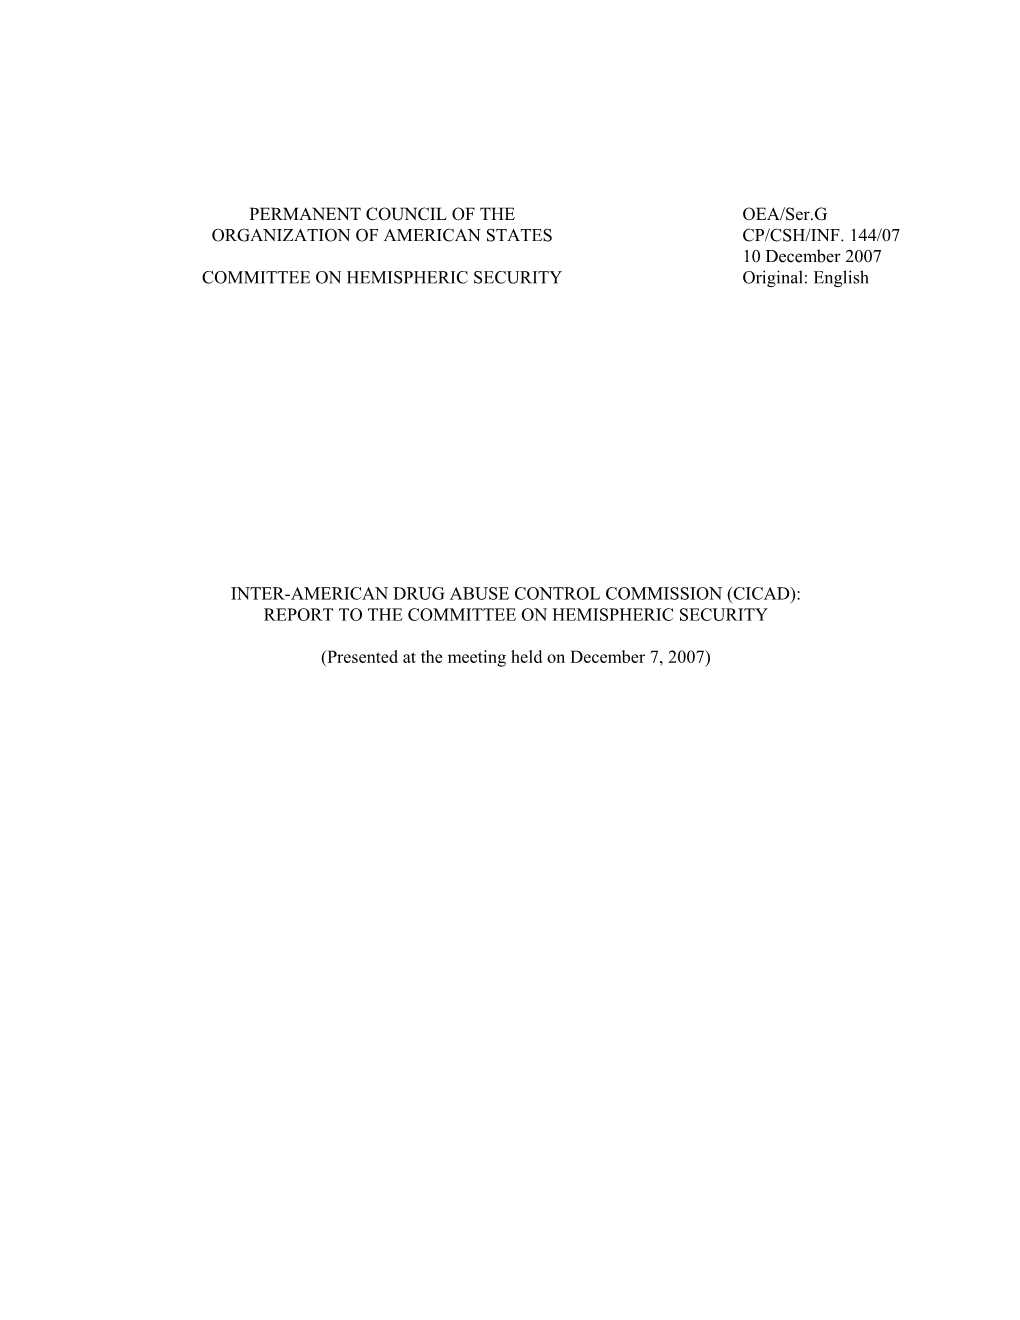 Report to the Committee on Hemispheric Security